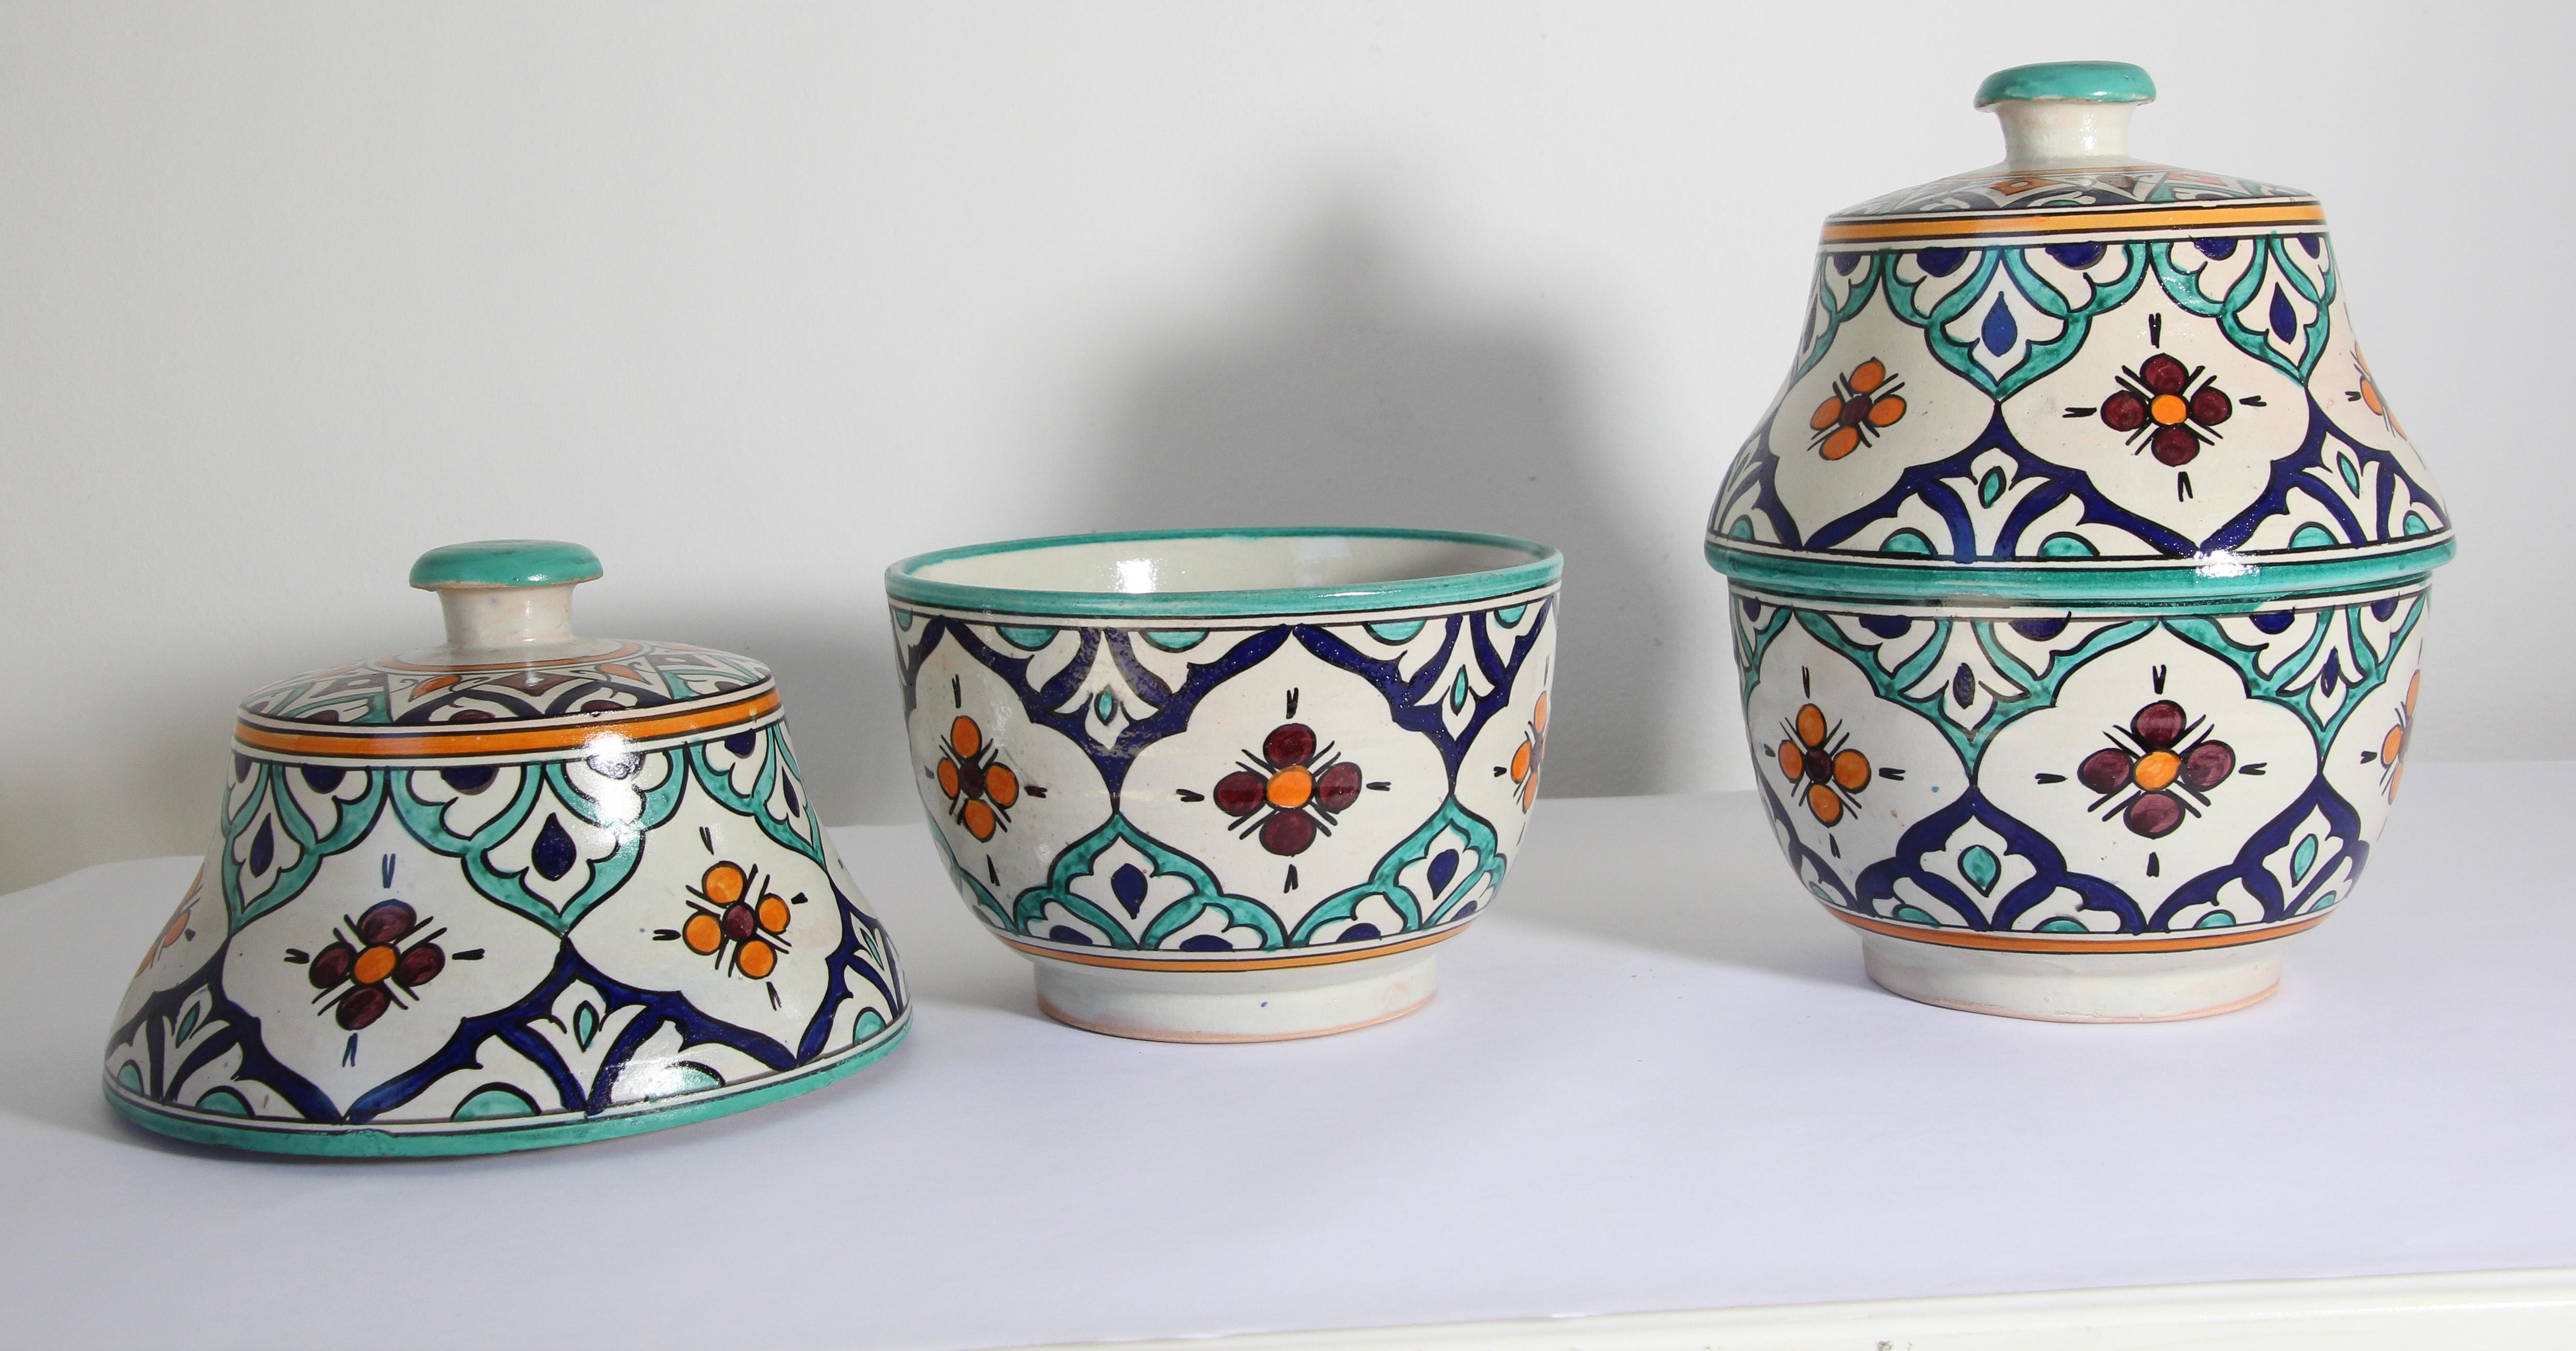 Moorish Ceramic Glazed Covered Urns Handcrafted in Fez Morocco For Sale 9